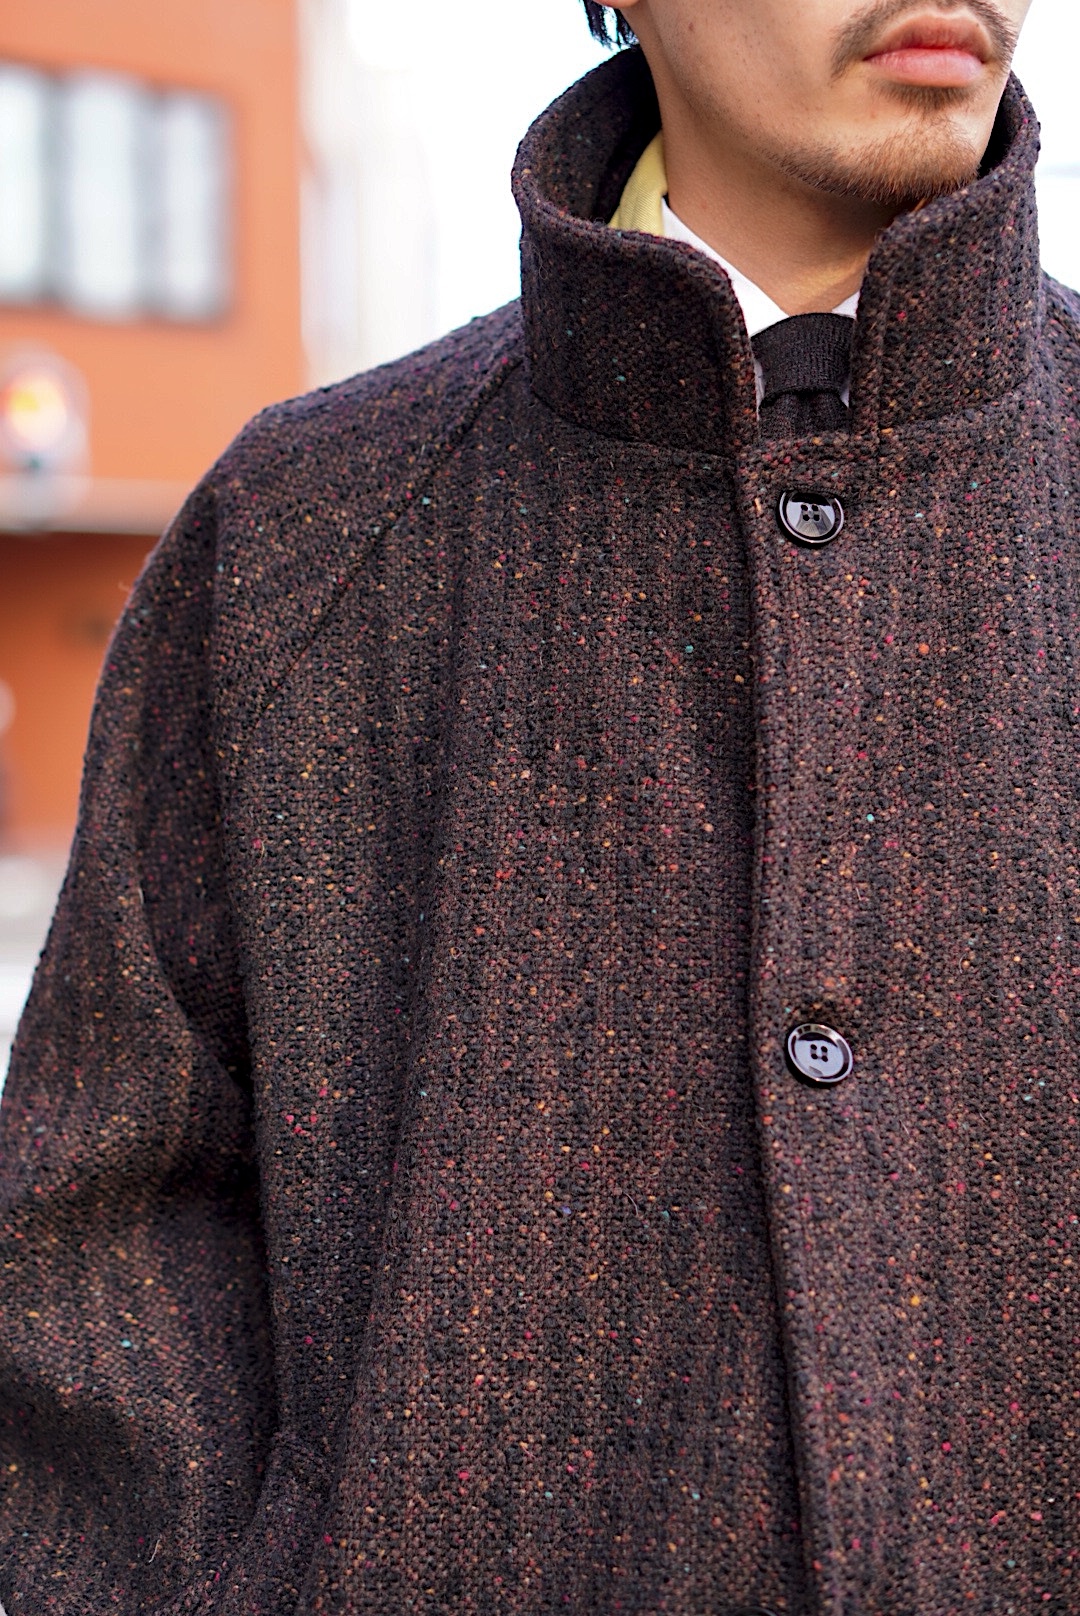 Arch Sapporo フィッシャーマンコートDonegal Tweed